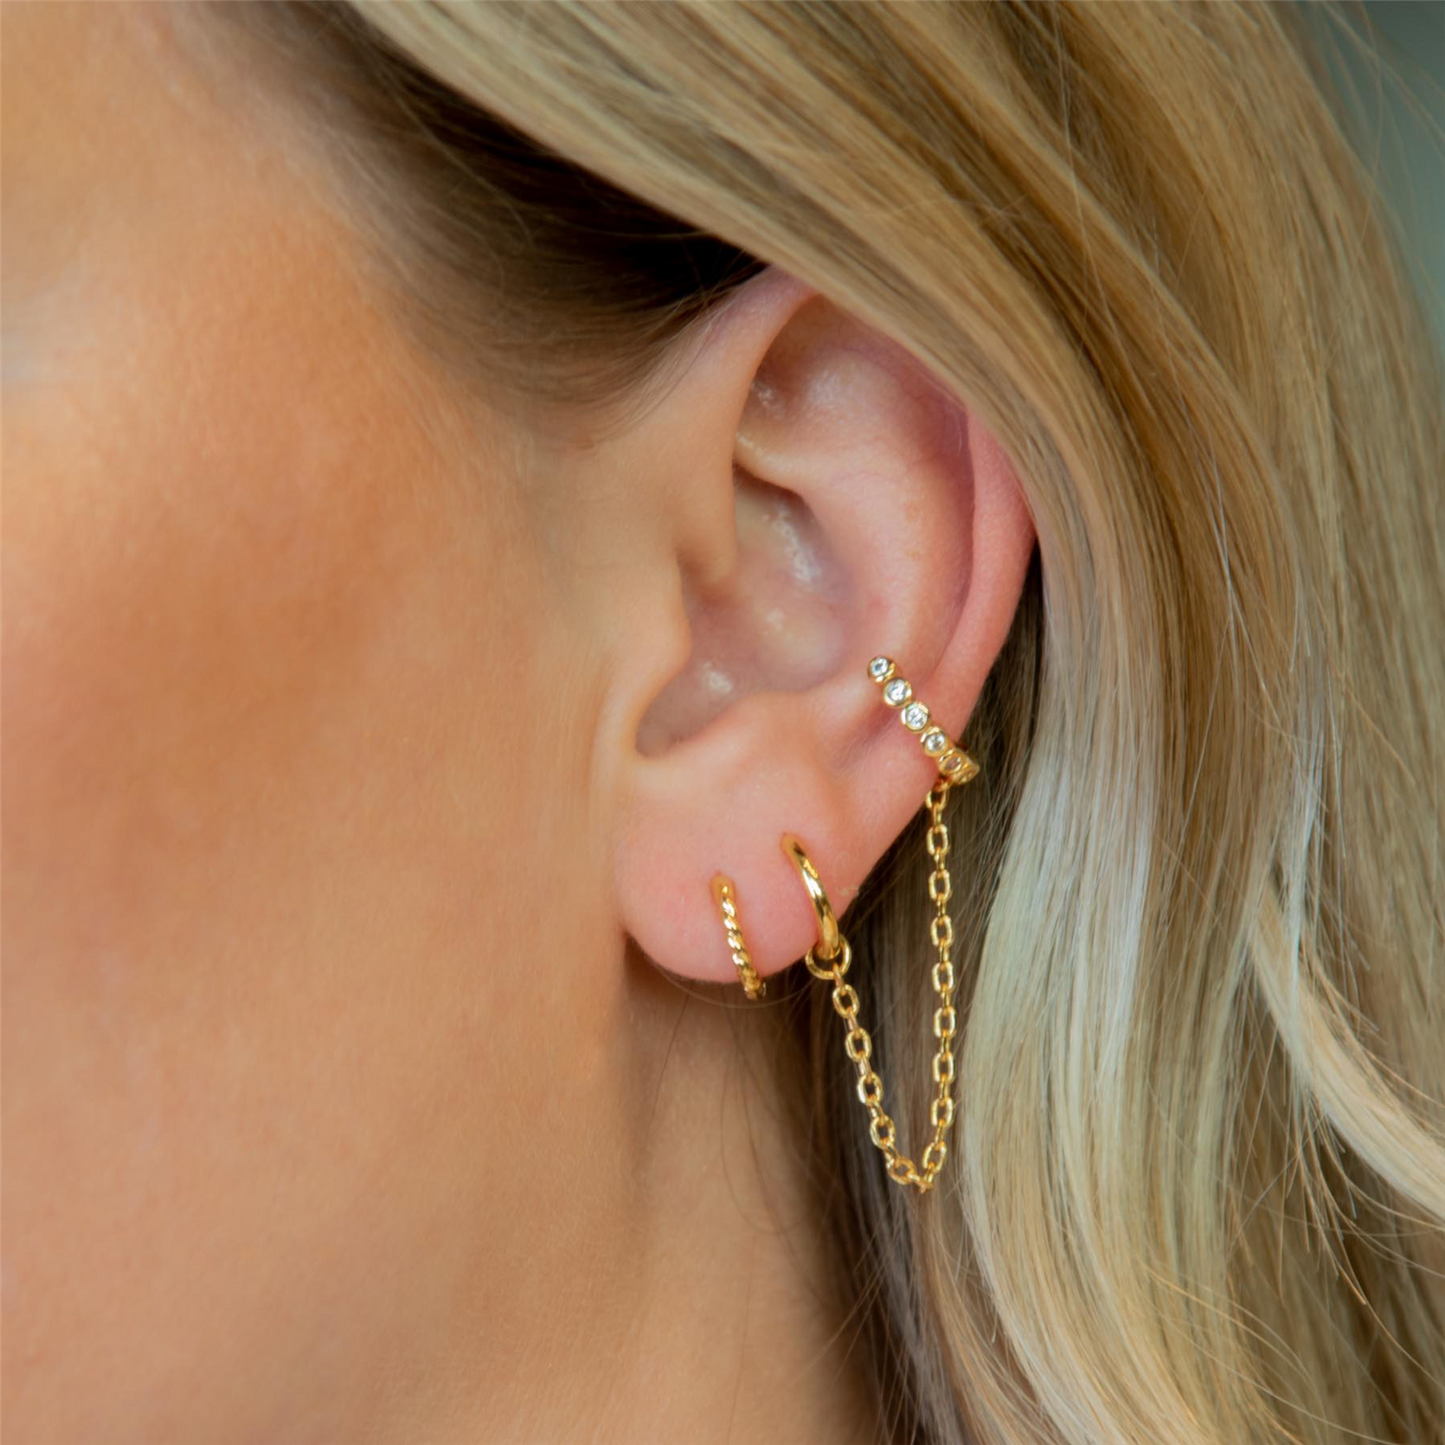 X-small hoops gold